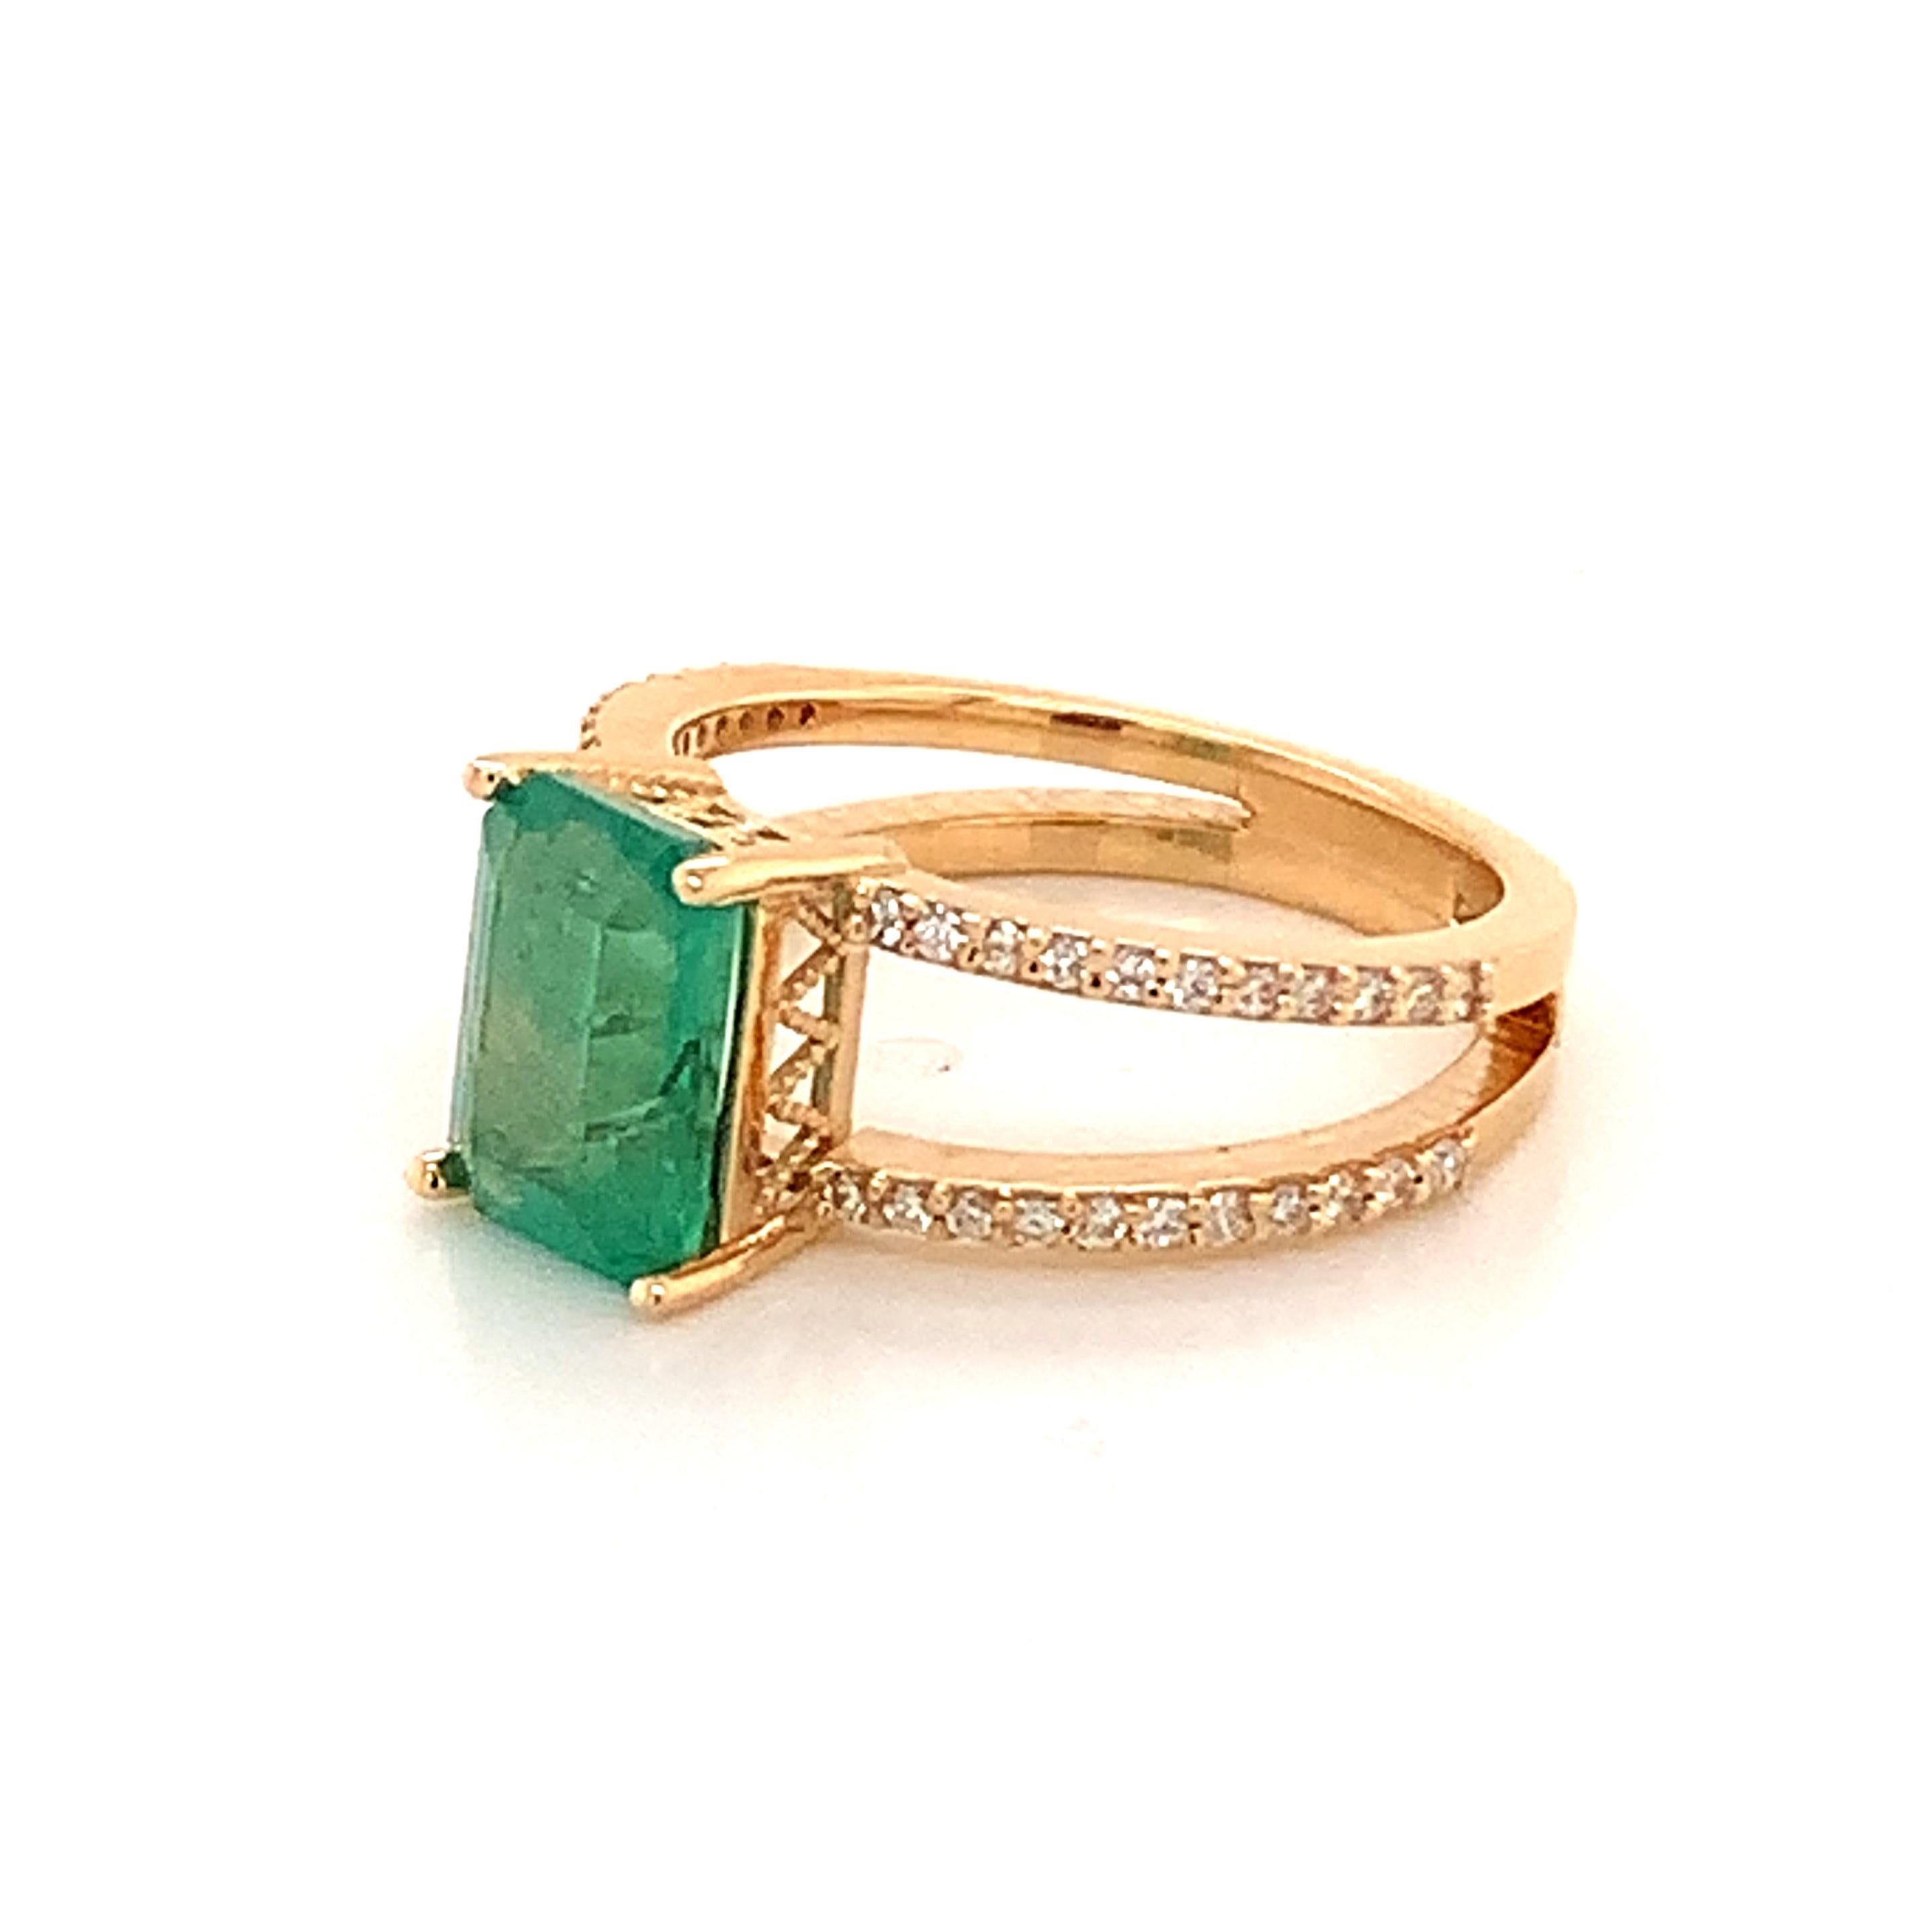 Women's Natural Emerald Diamond Ring 14k Gold 2.32 TCW Certified For Sale